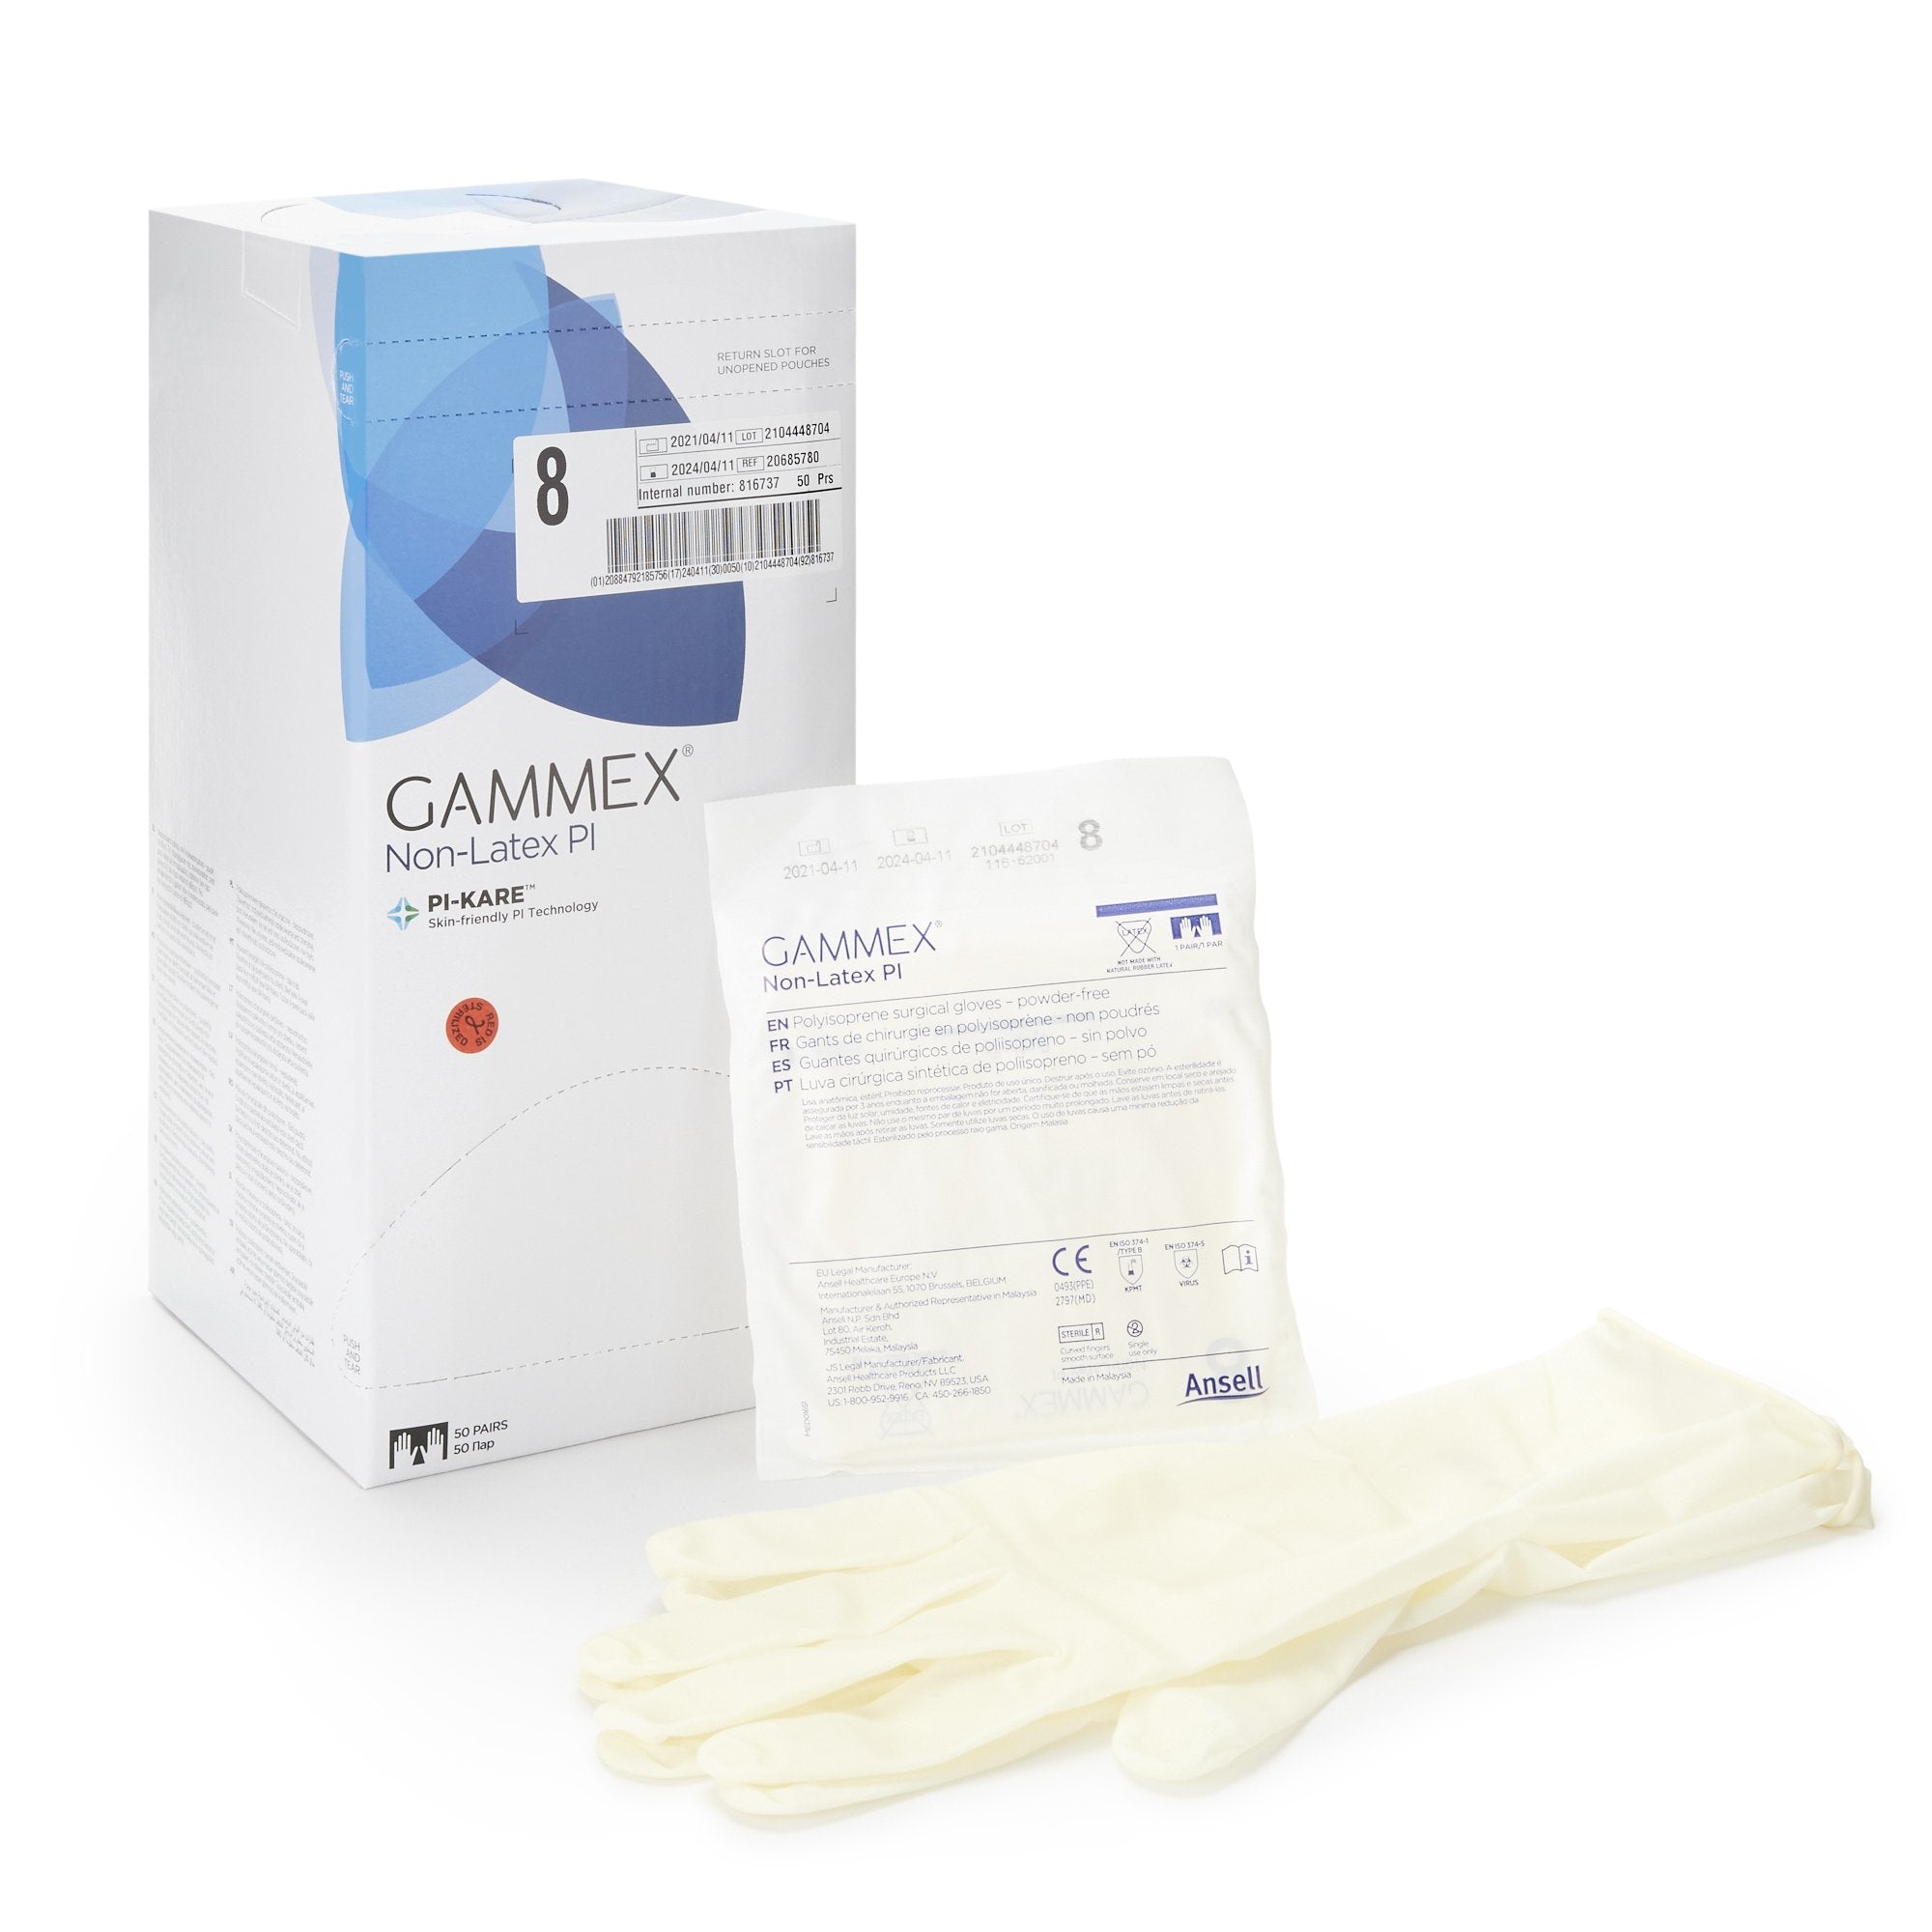 Ansell #20685780 Surgical Glove GAMMEX® Non-Latex PI Size 8 Sterile 50/bx